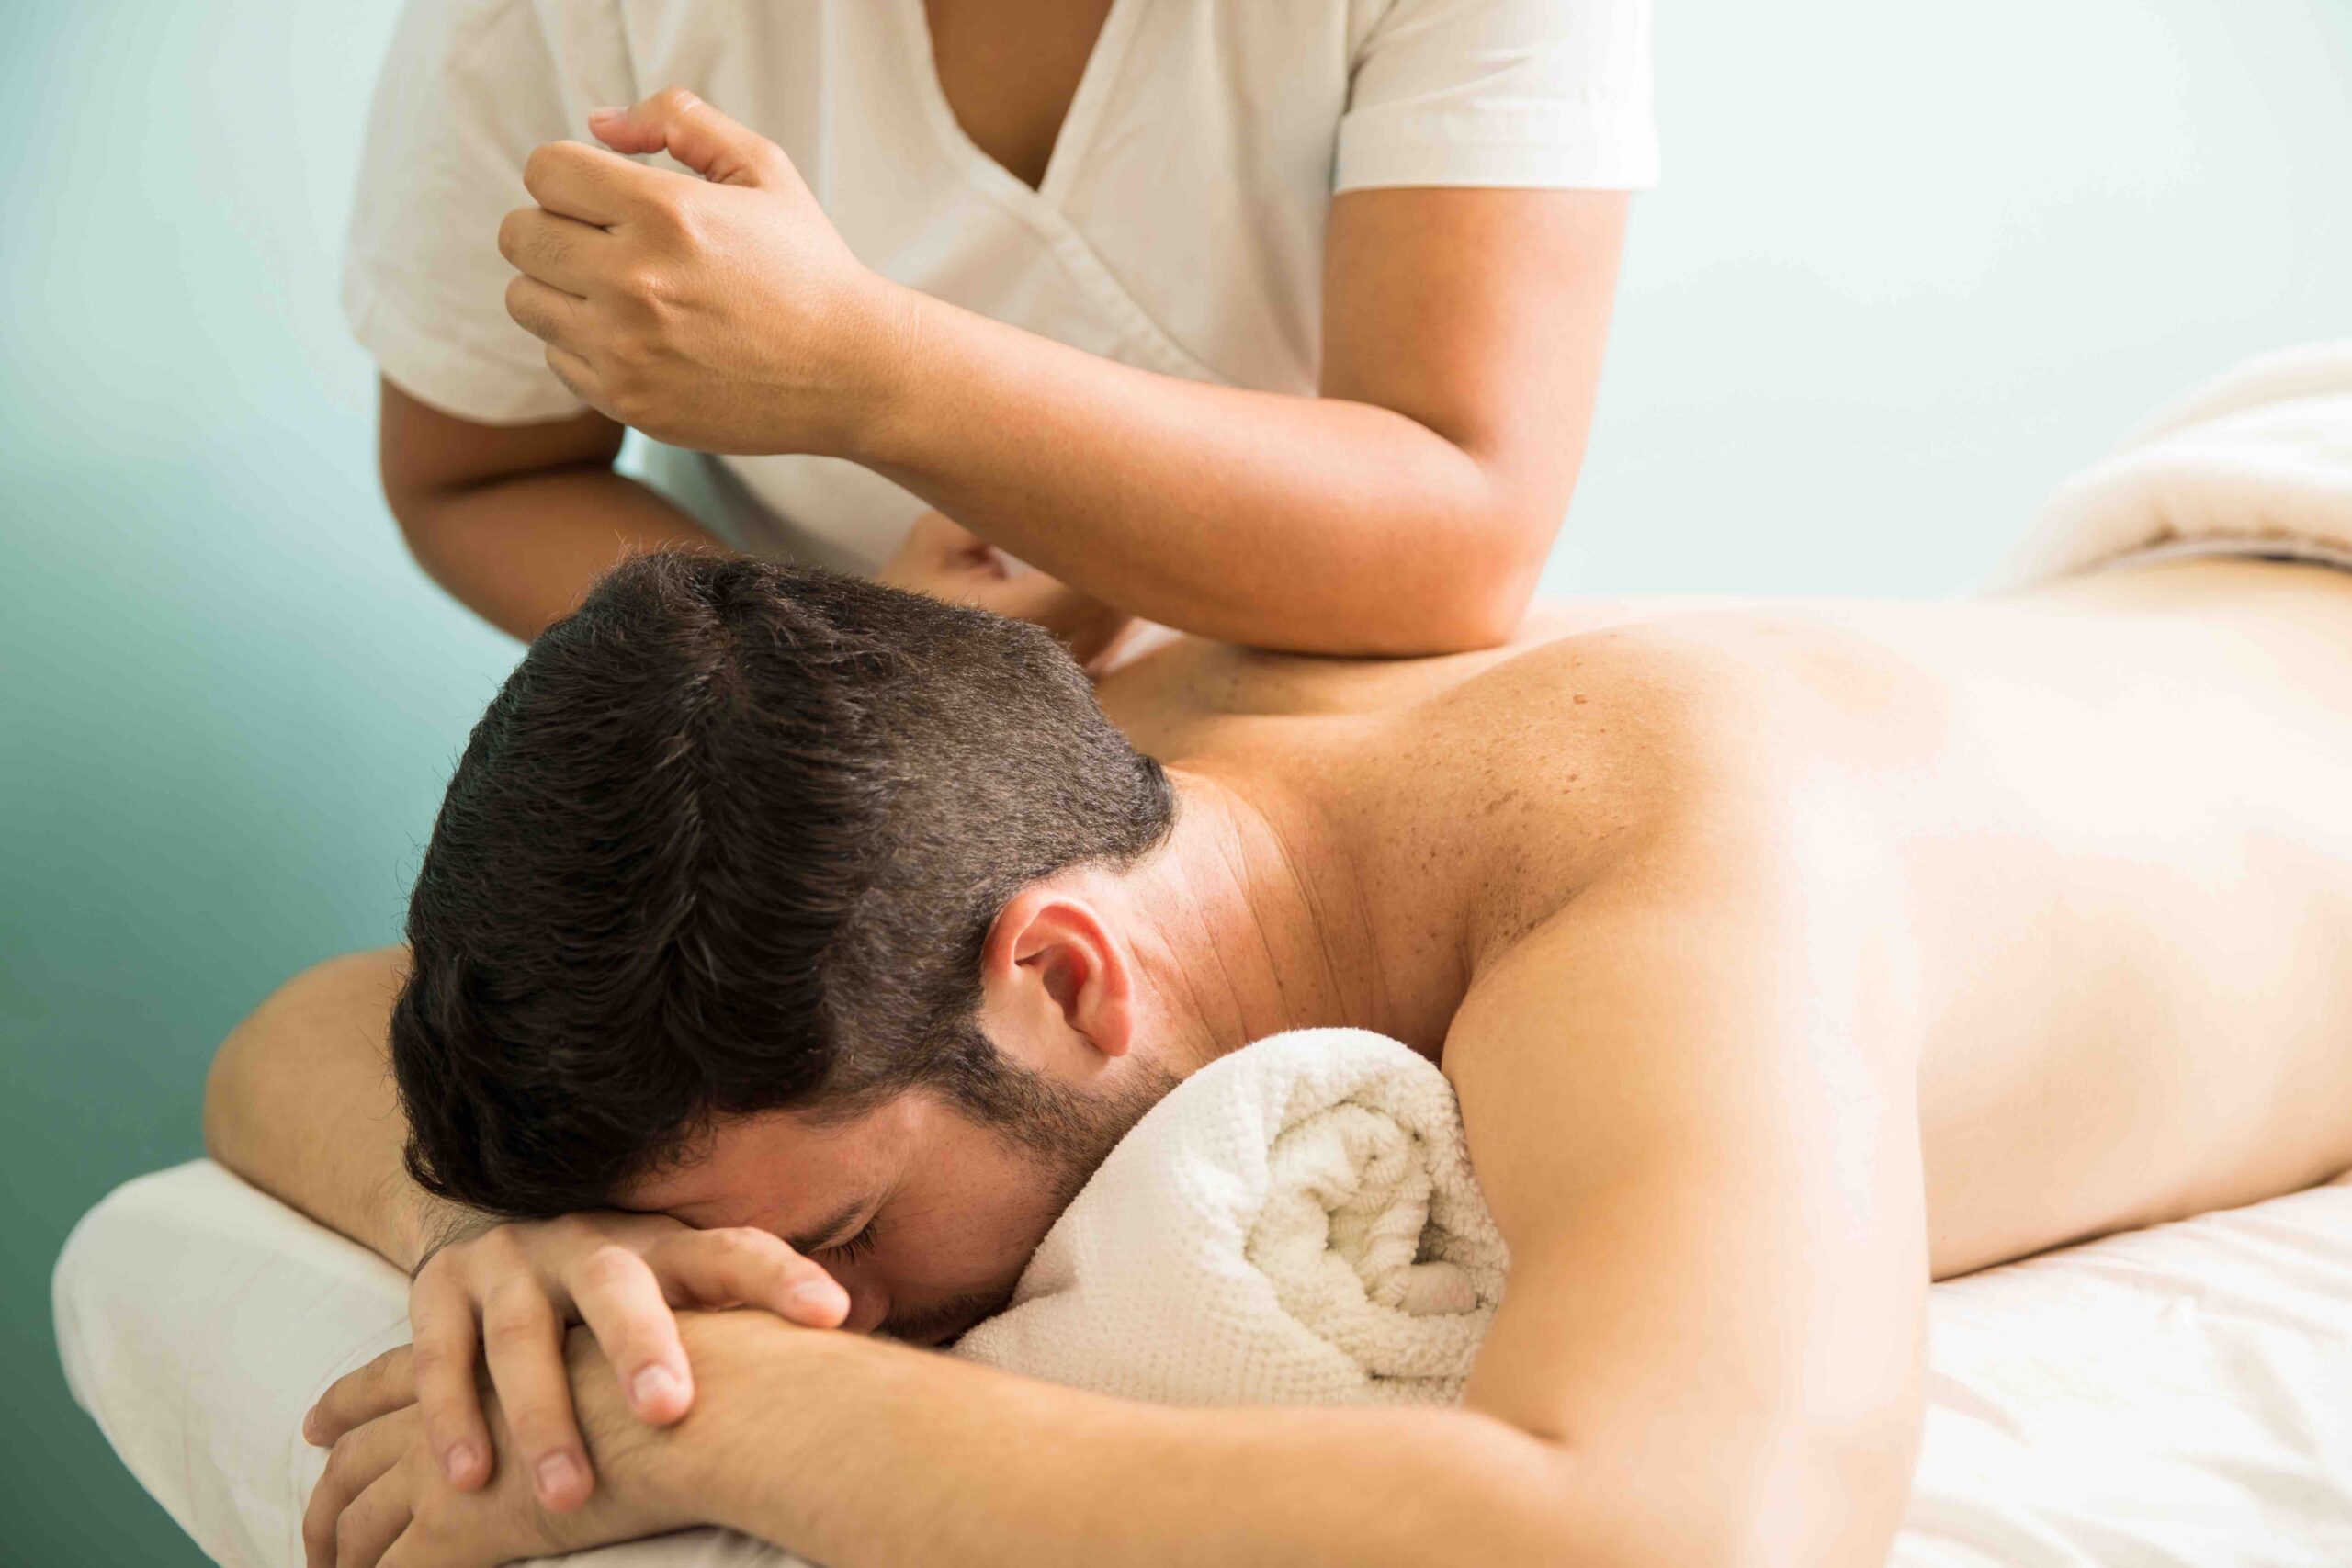 Deep Tissue Massage 101: All the Basics You Need to Know